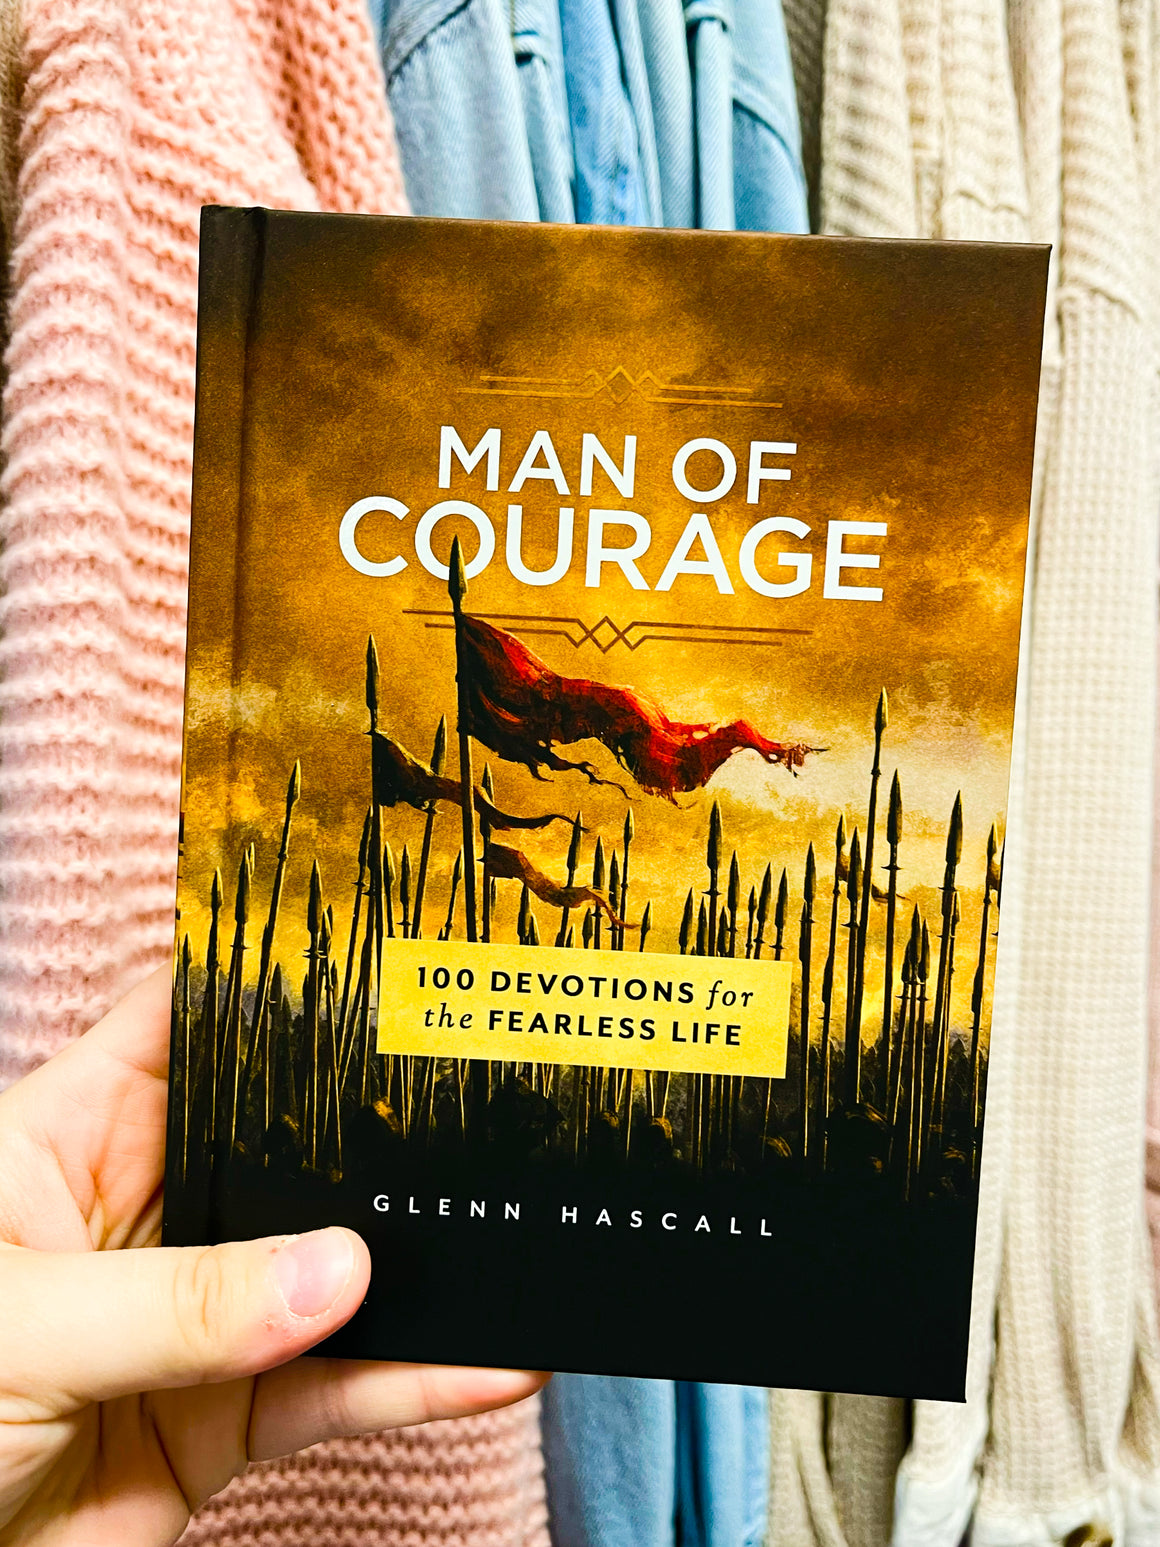 Man of Courage